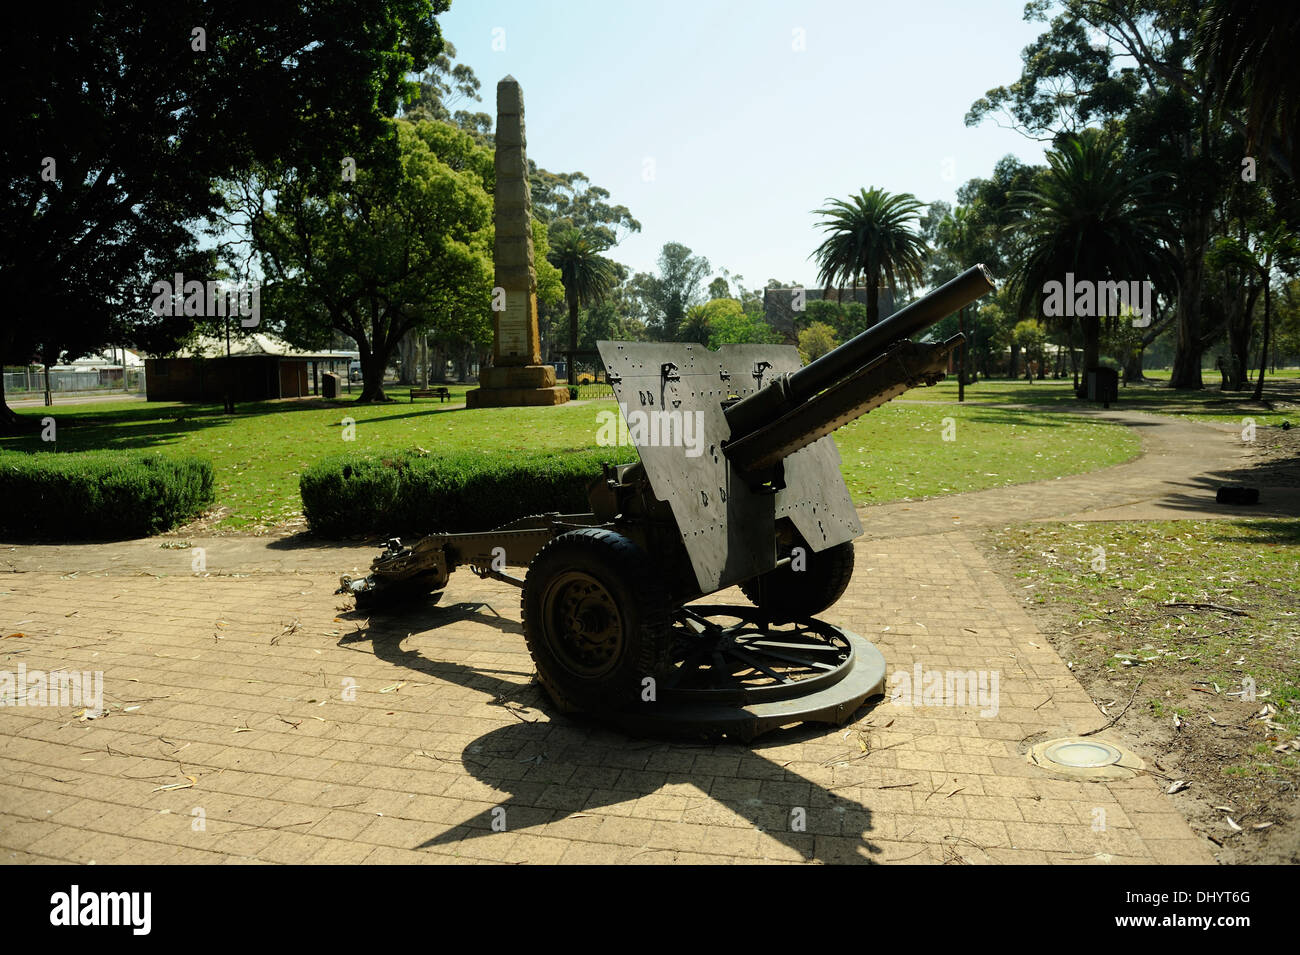 One of two 25 pounder QF (Quick Firing) Field Guns in Stirling Park, Guildford, Western Australia Stock Photo